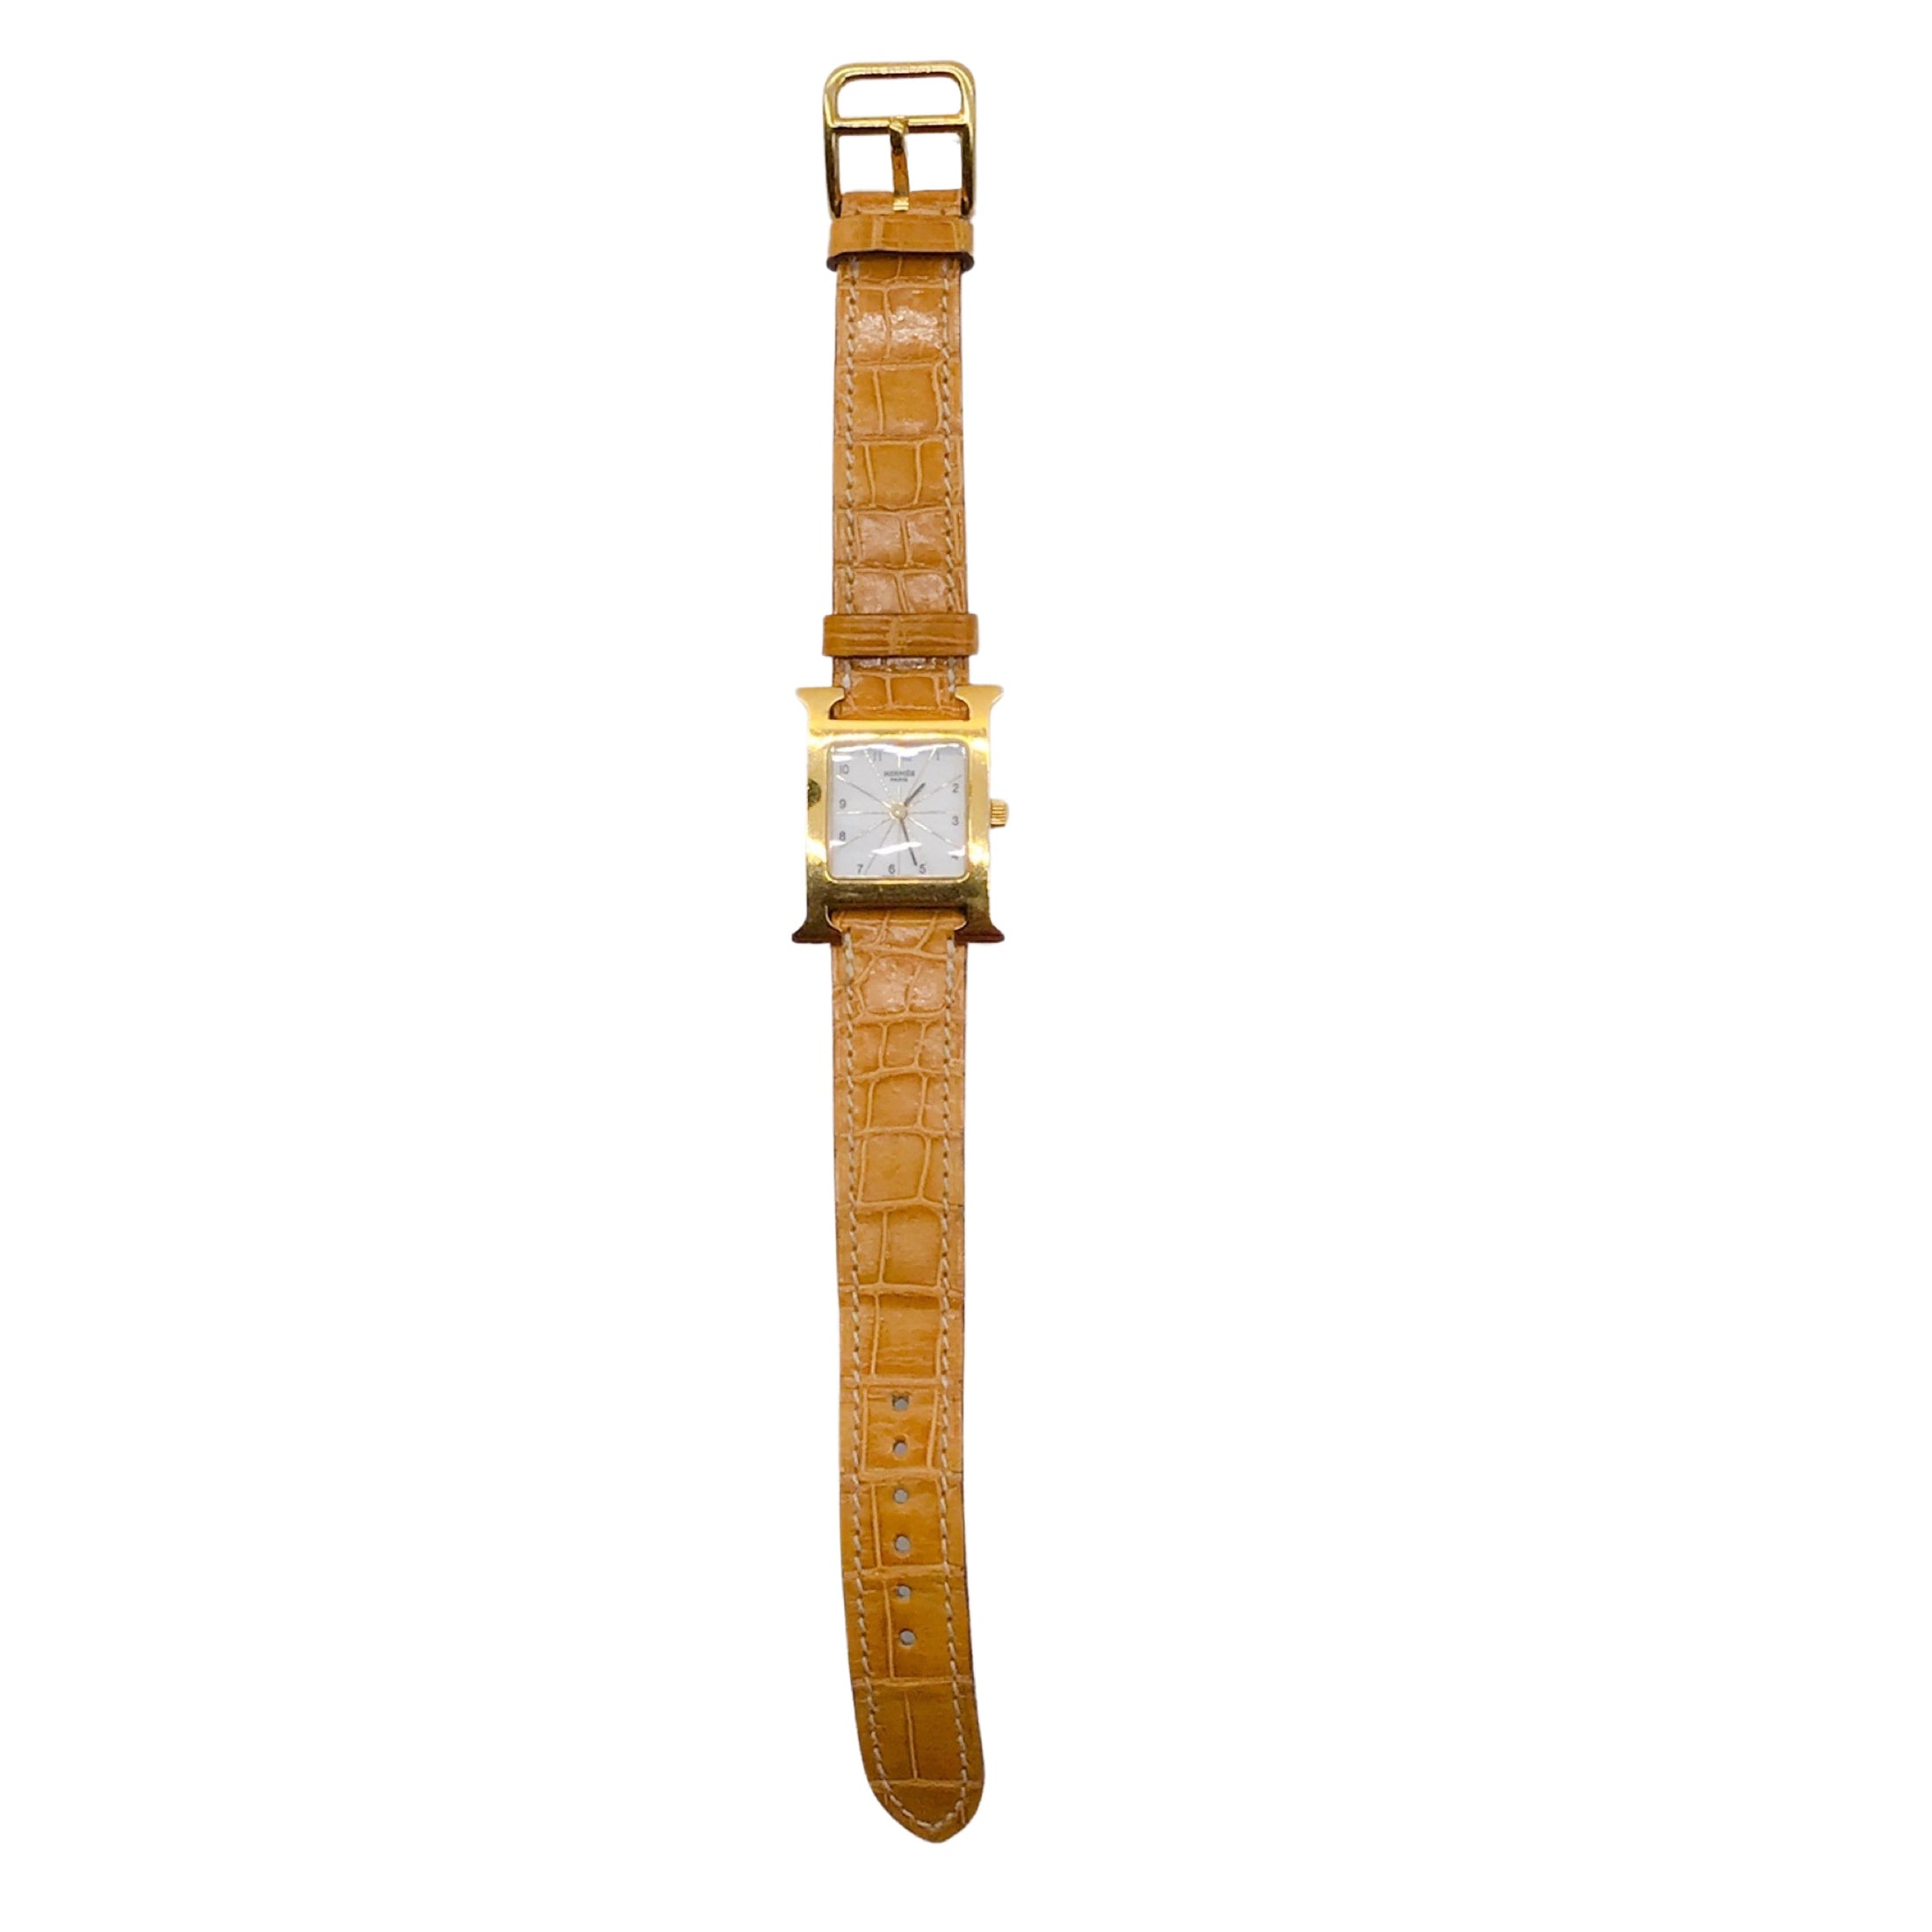 Hermes 2004 Tan / Gold Plated Crocodile Skin Leather 21mm Heure H Watch